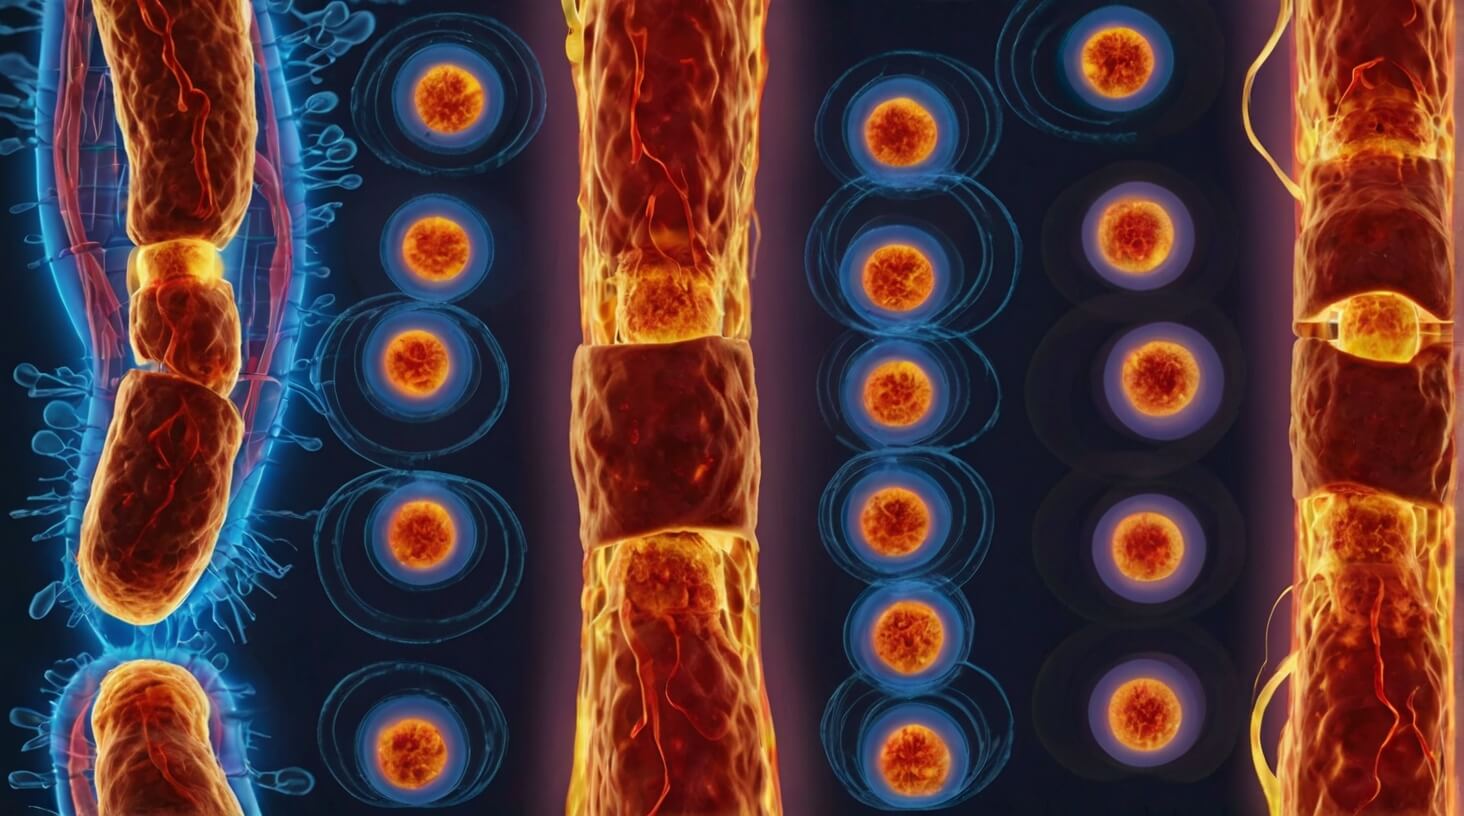 Illustration of a magnified view of inflamed tissue cells, representing the concept of Understanding Inflammation.